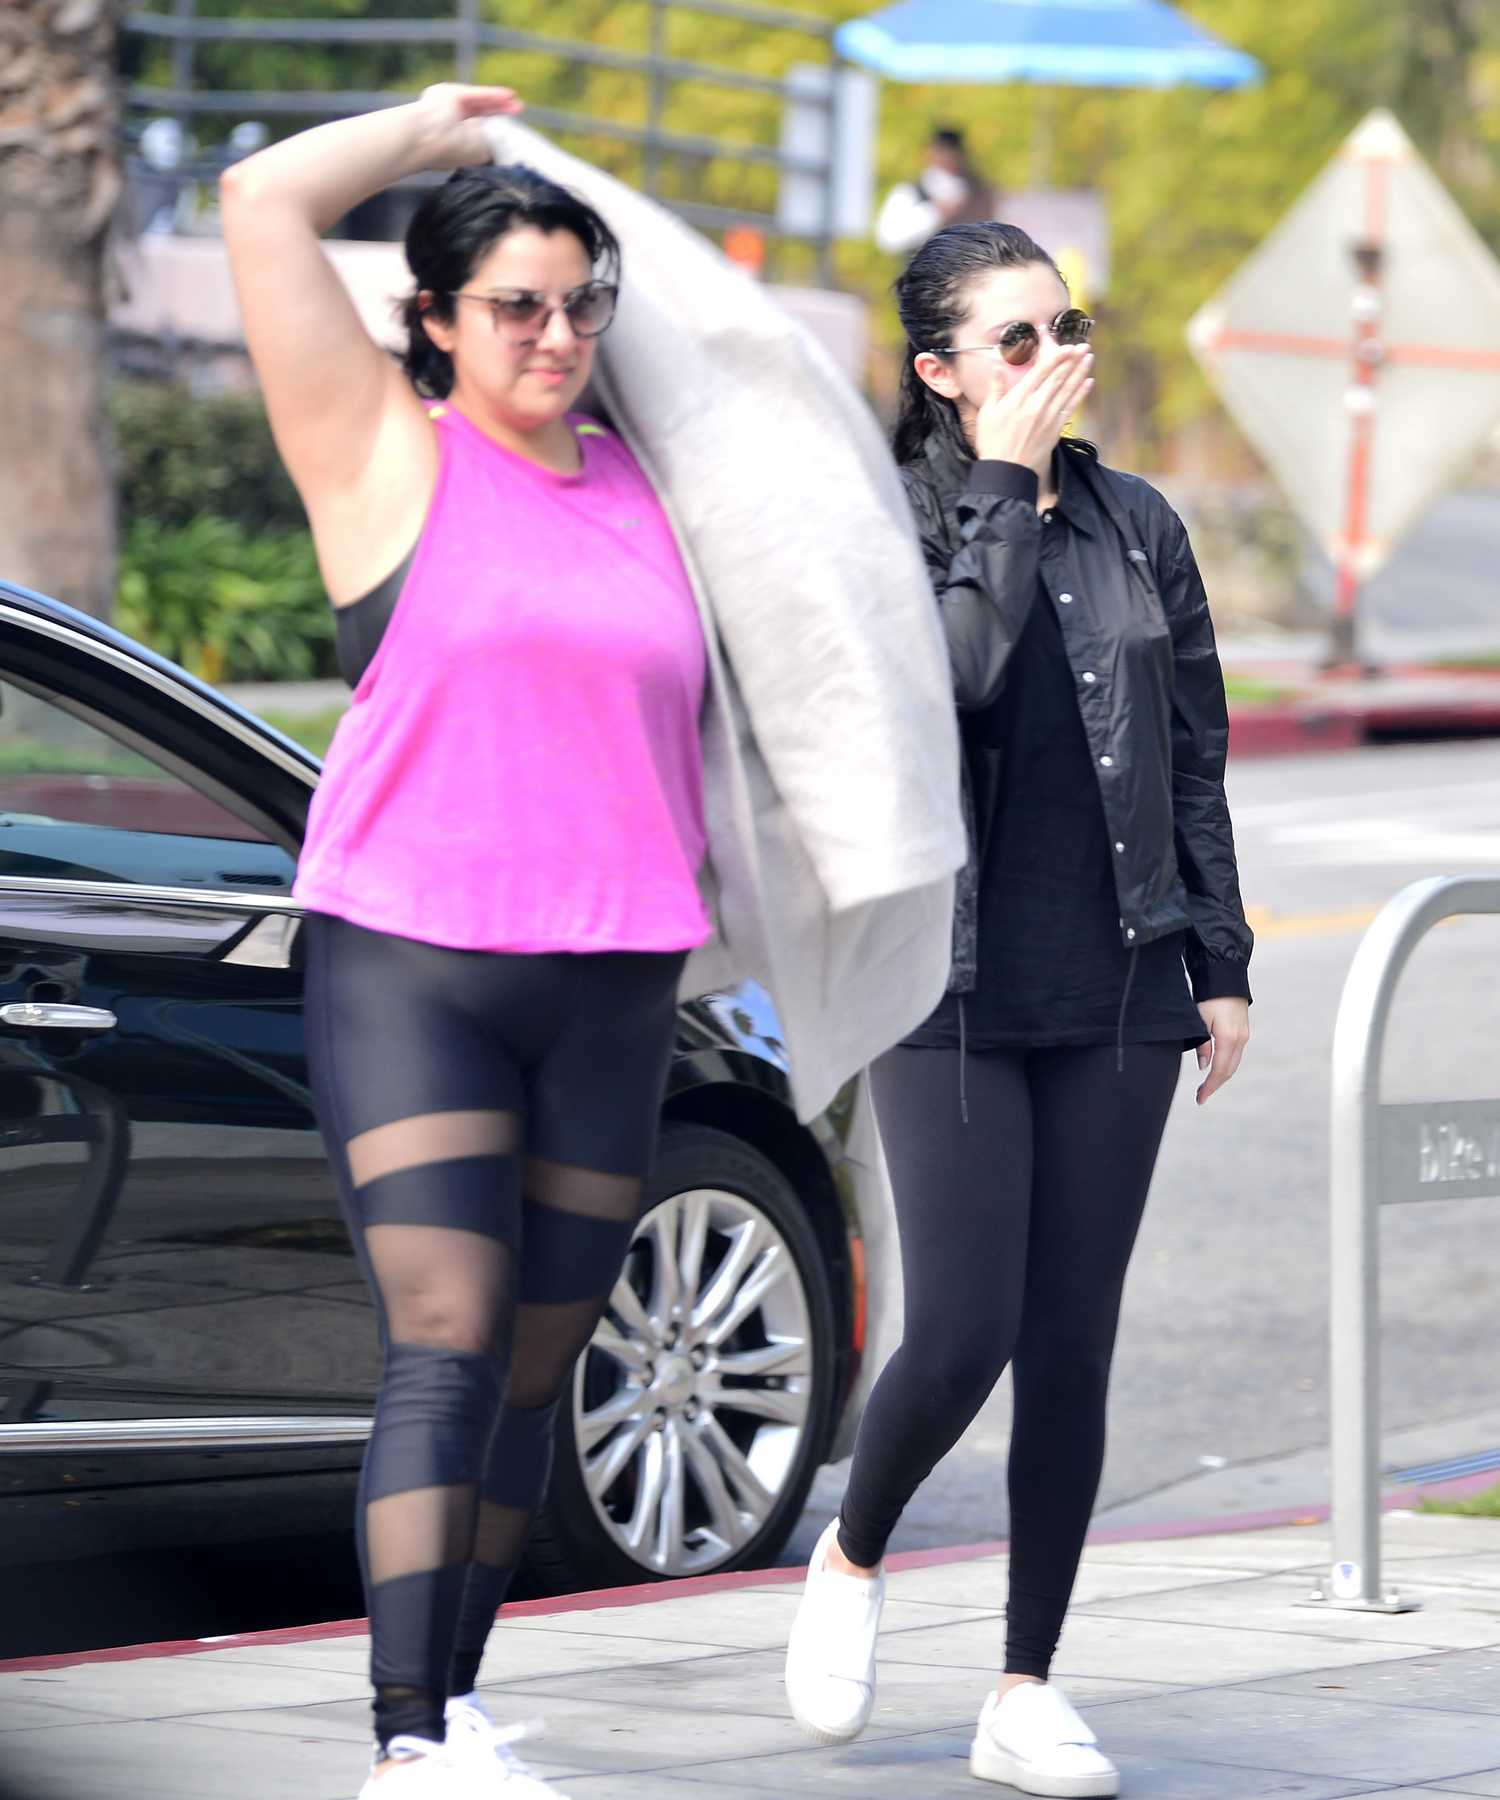 Selena_Gomez_-_grabs_a_morning_coffee_after_doing_pilates_with_a_friend2C_LA_01292019-01.jpg